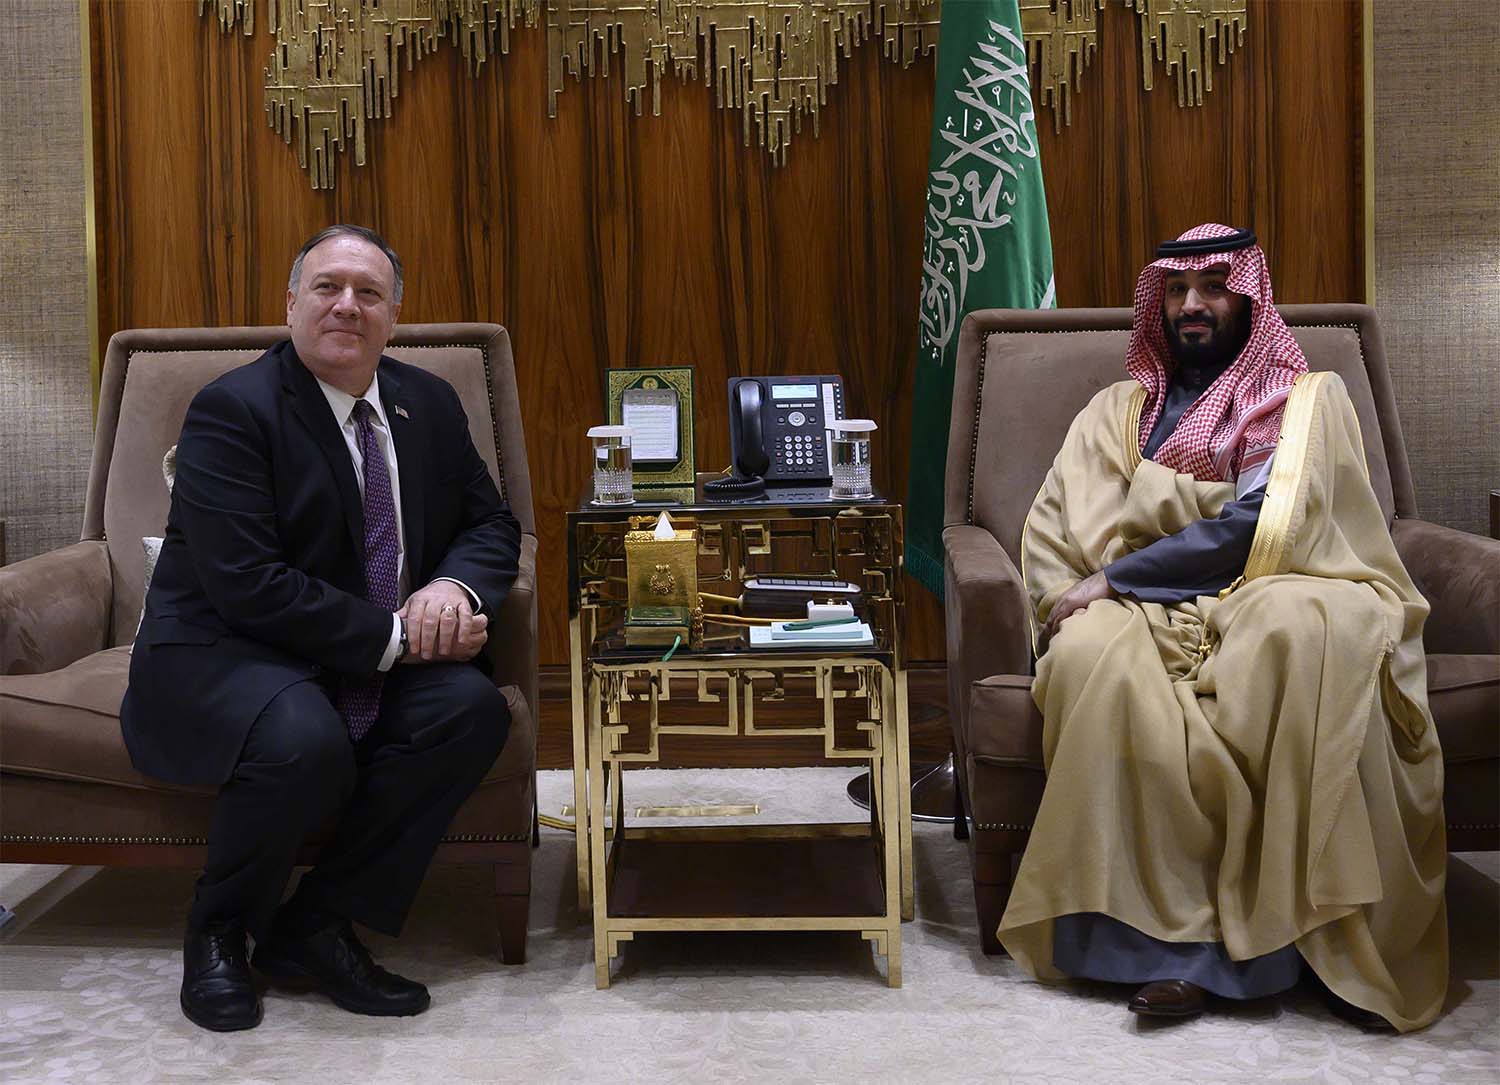 US Secretary of State Mike Pompeo meets with Saudi Arabia's Crown Prince Mohammed bin Salman at Irqah Palace, in Riyadh, February 2020